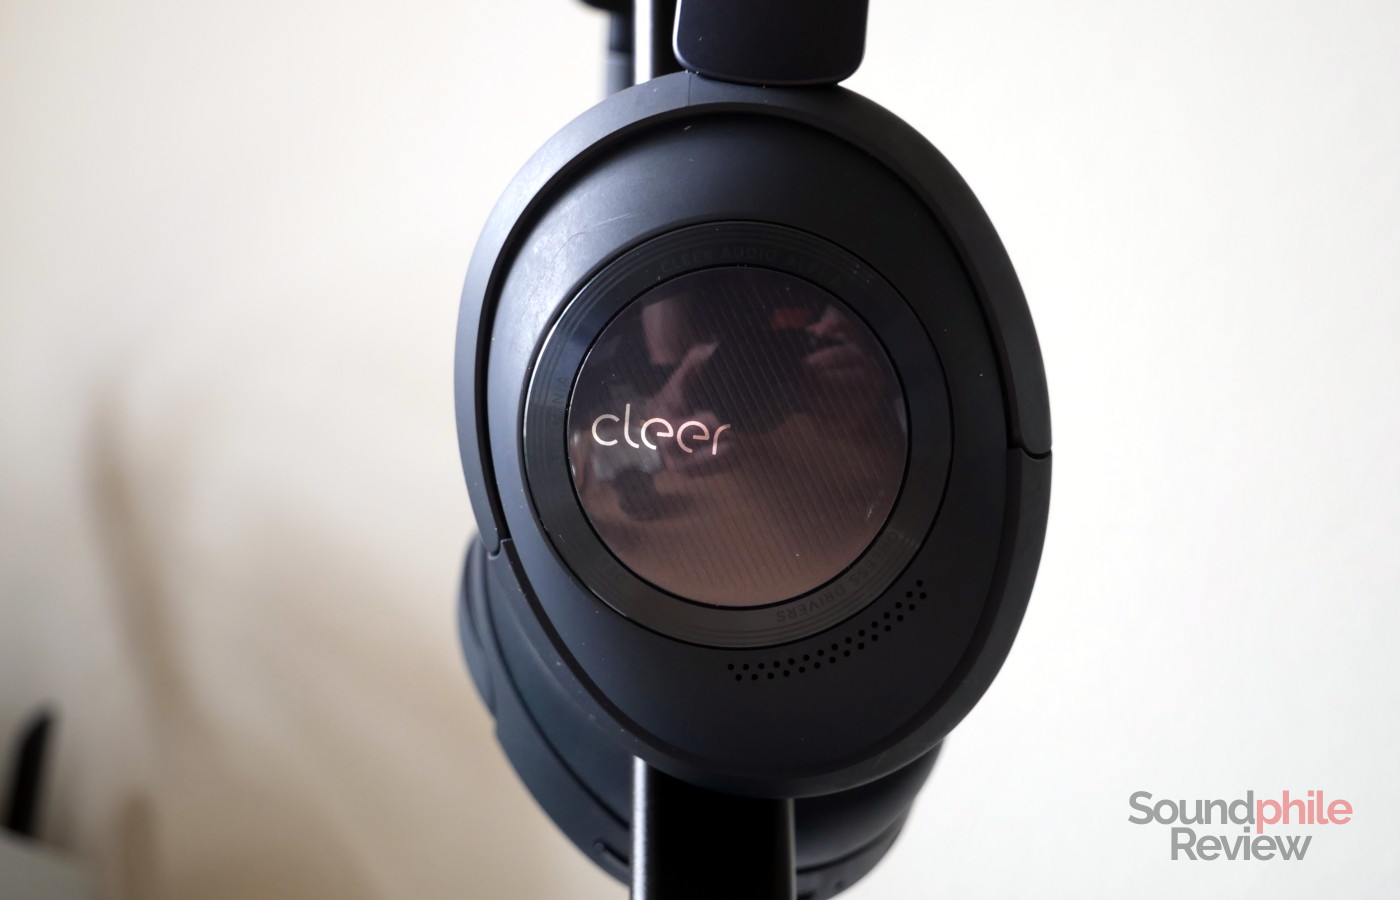 The Cleer Alpha have a touch surface on the earcups